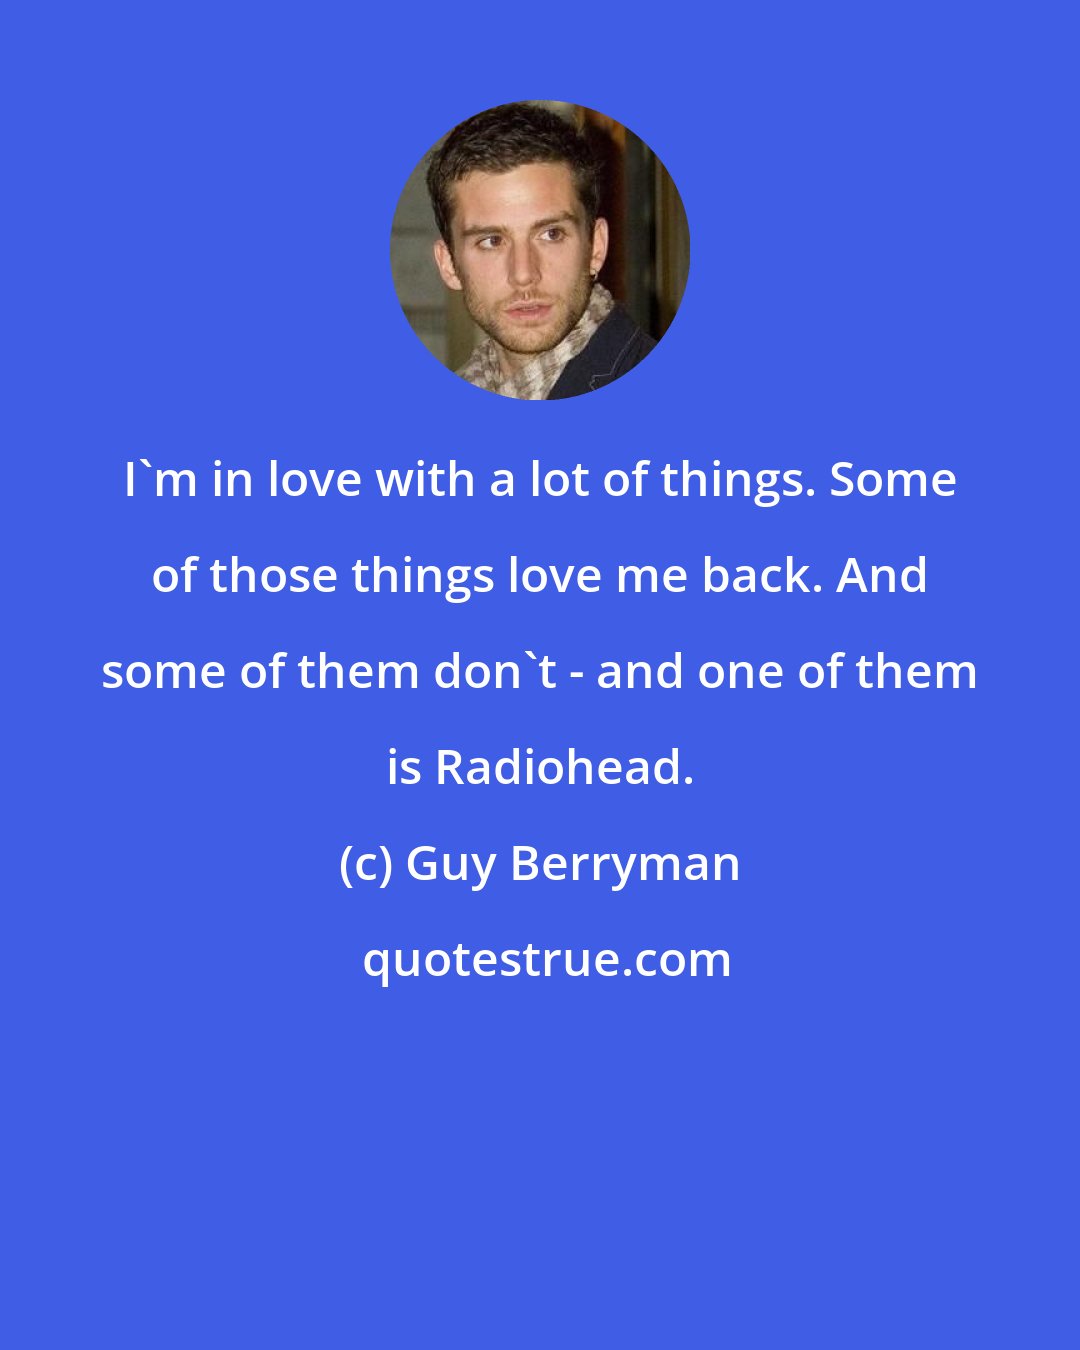 Guy Berryman: I'm in love with a lot of things. Some of those things love me back. And some of them don't - and one of them is Radiohead.